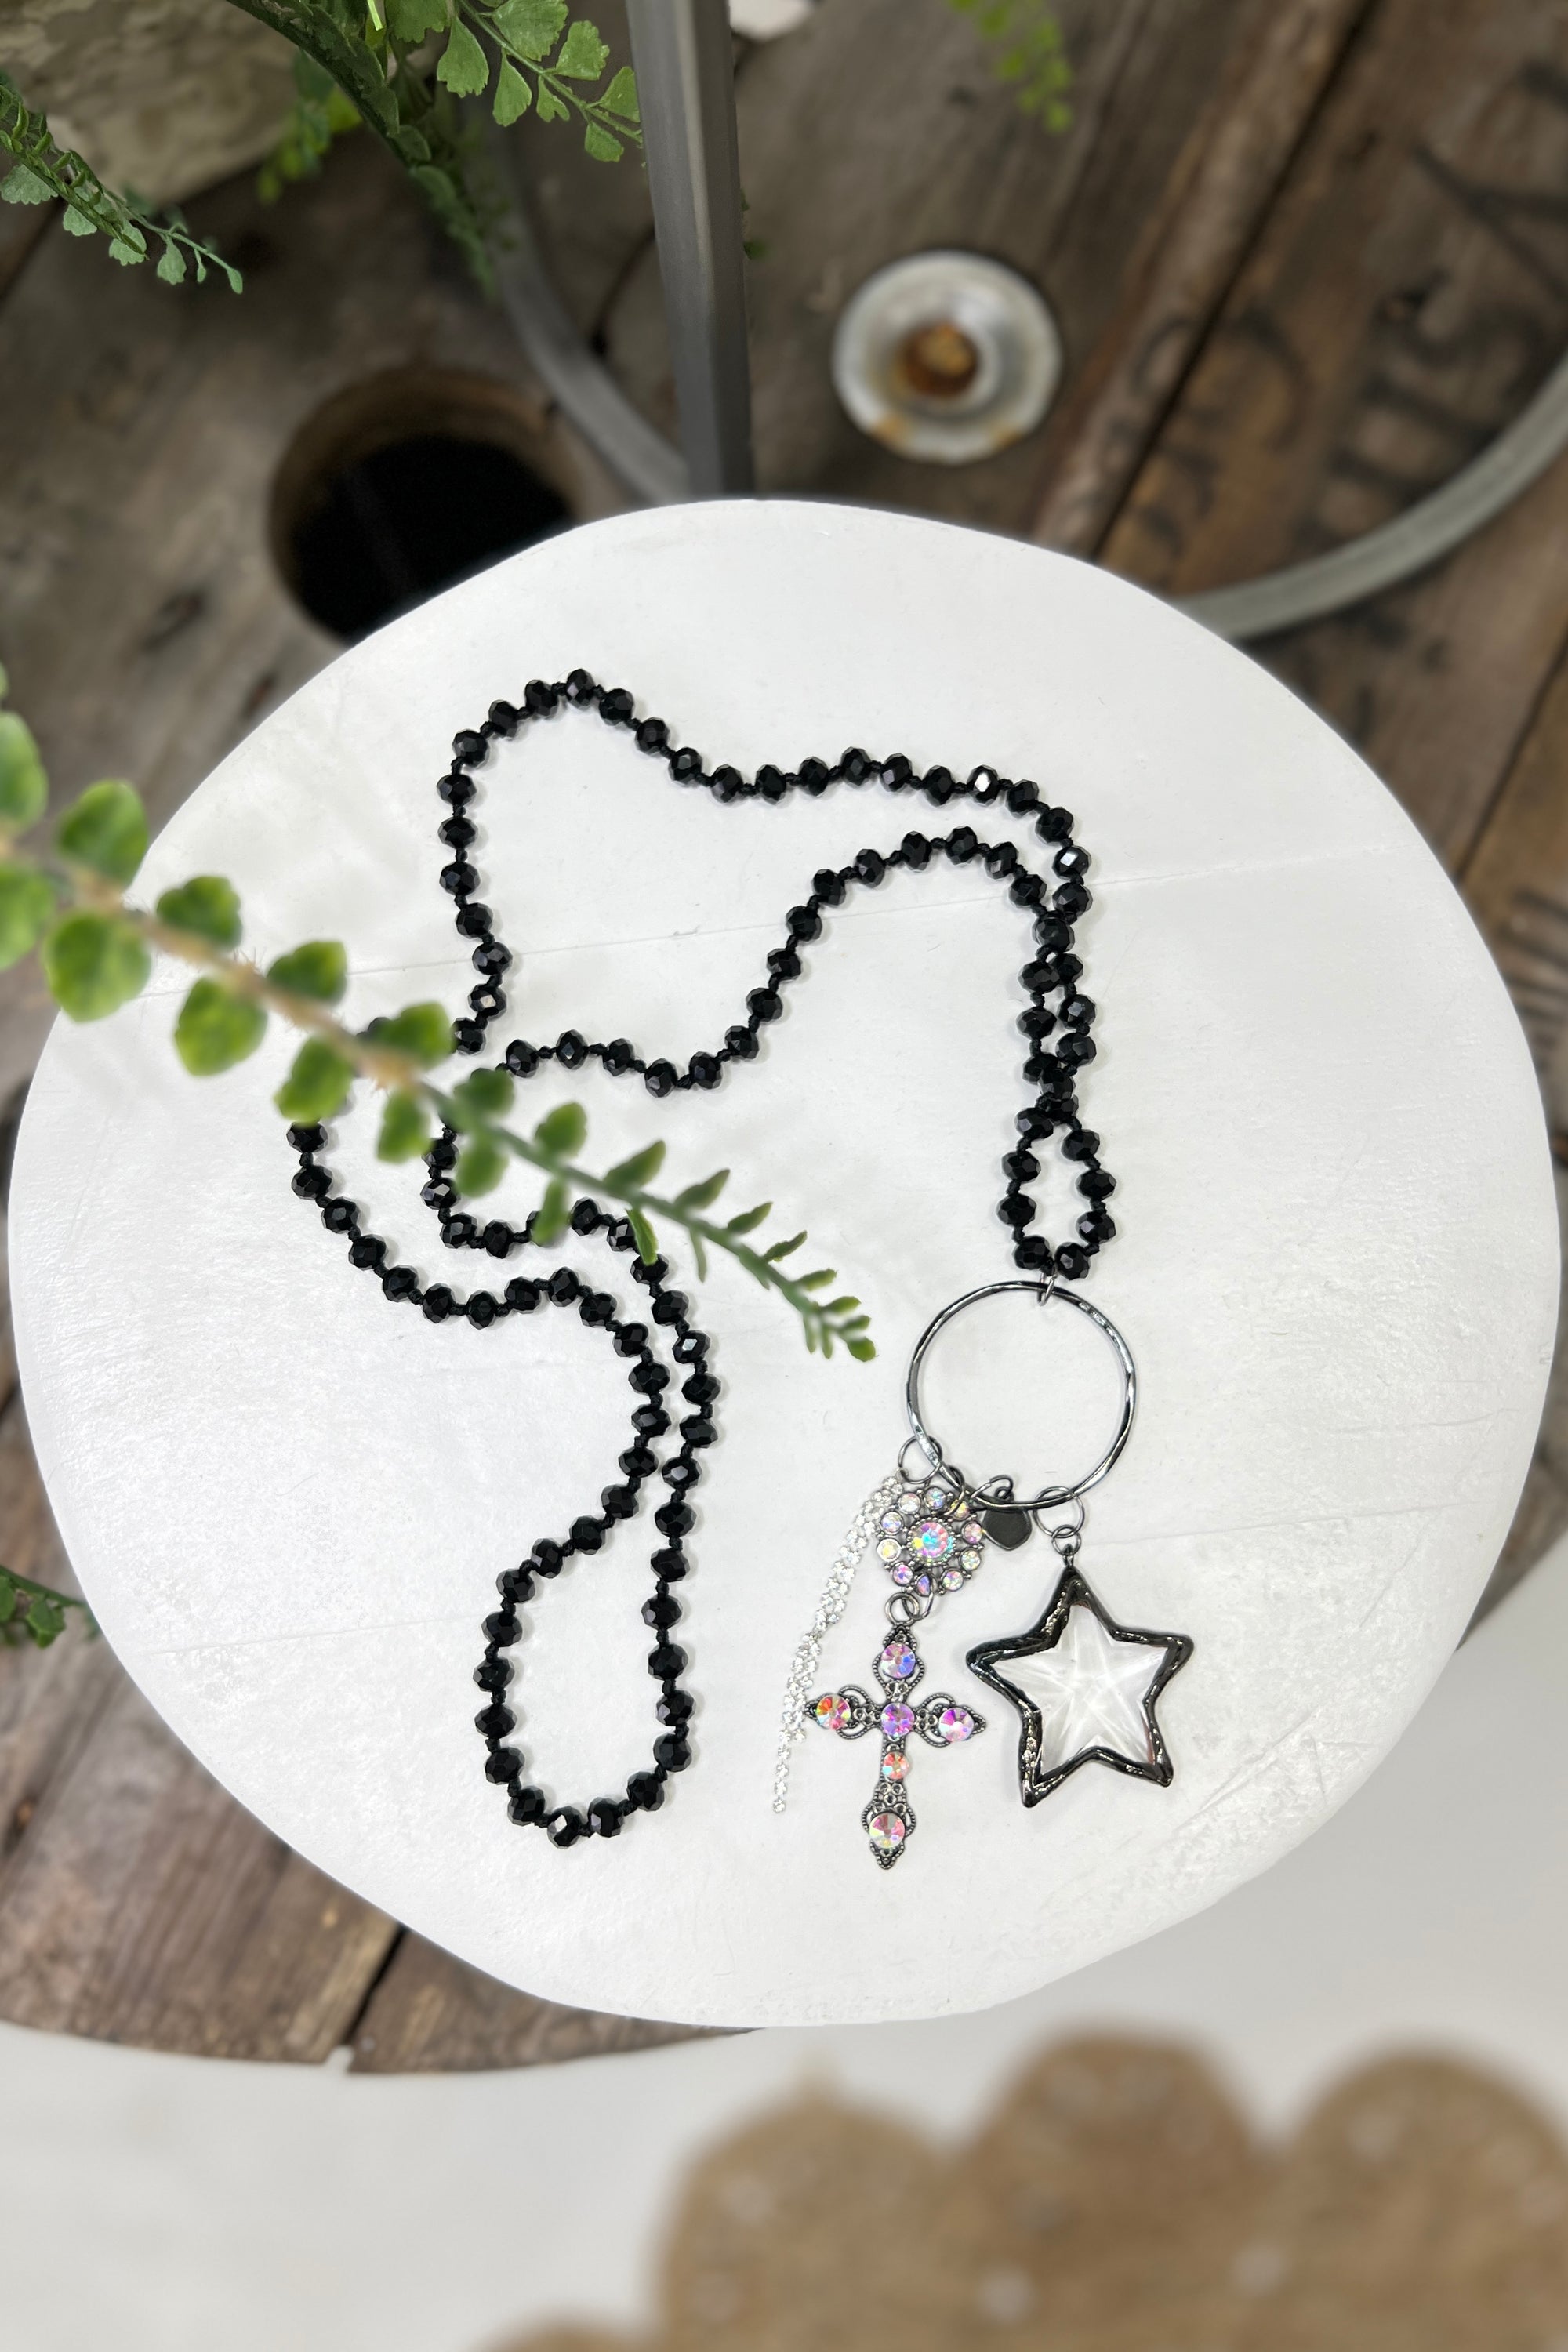 Chasing Stars Necklace RESTOCK